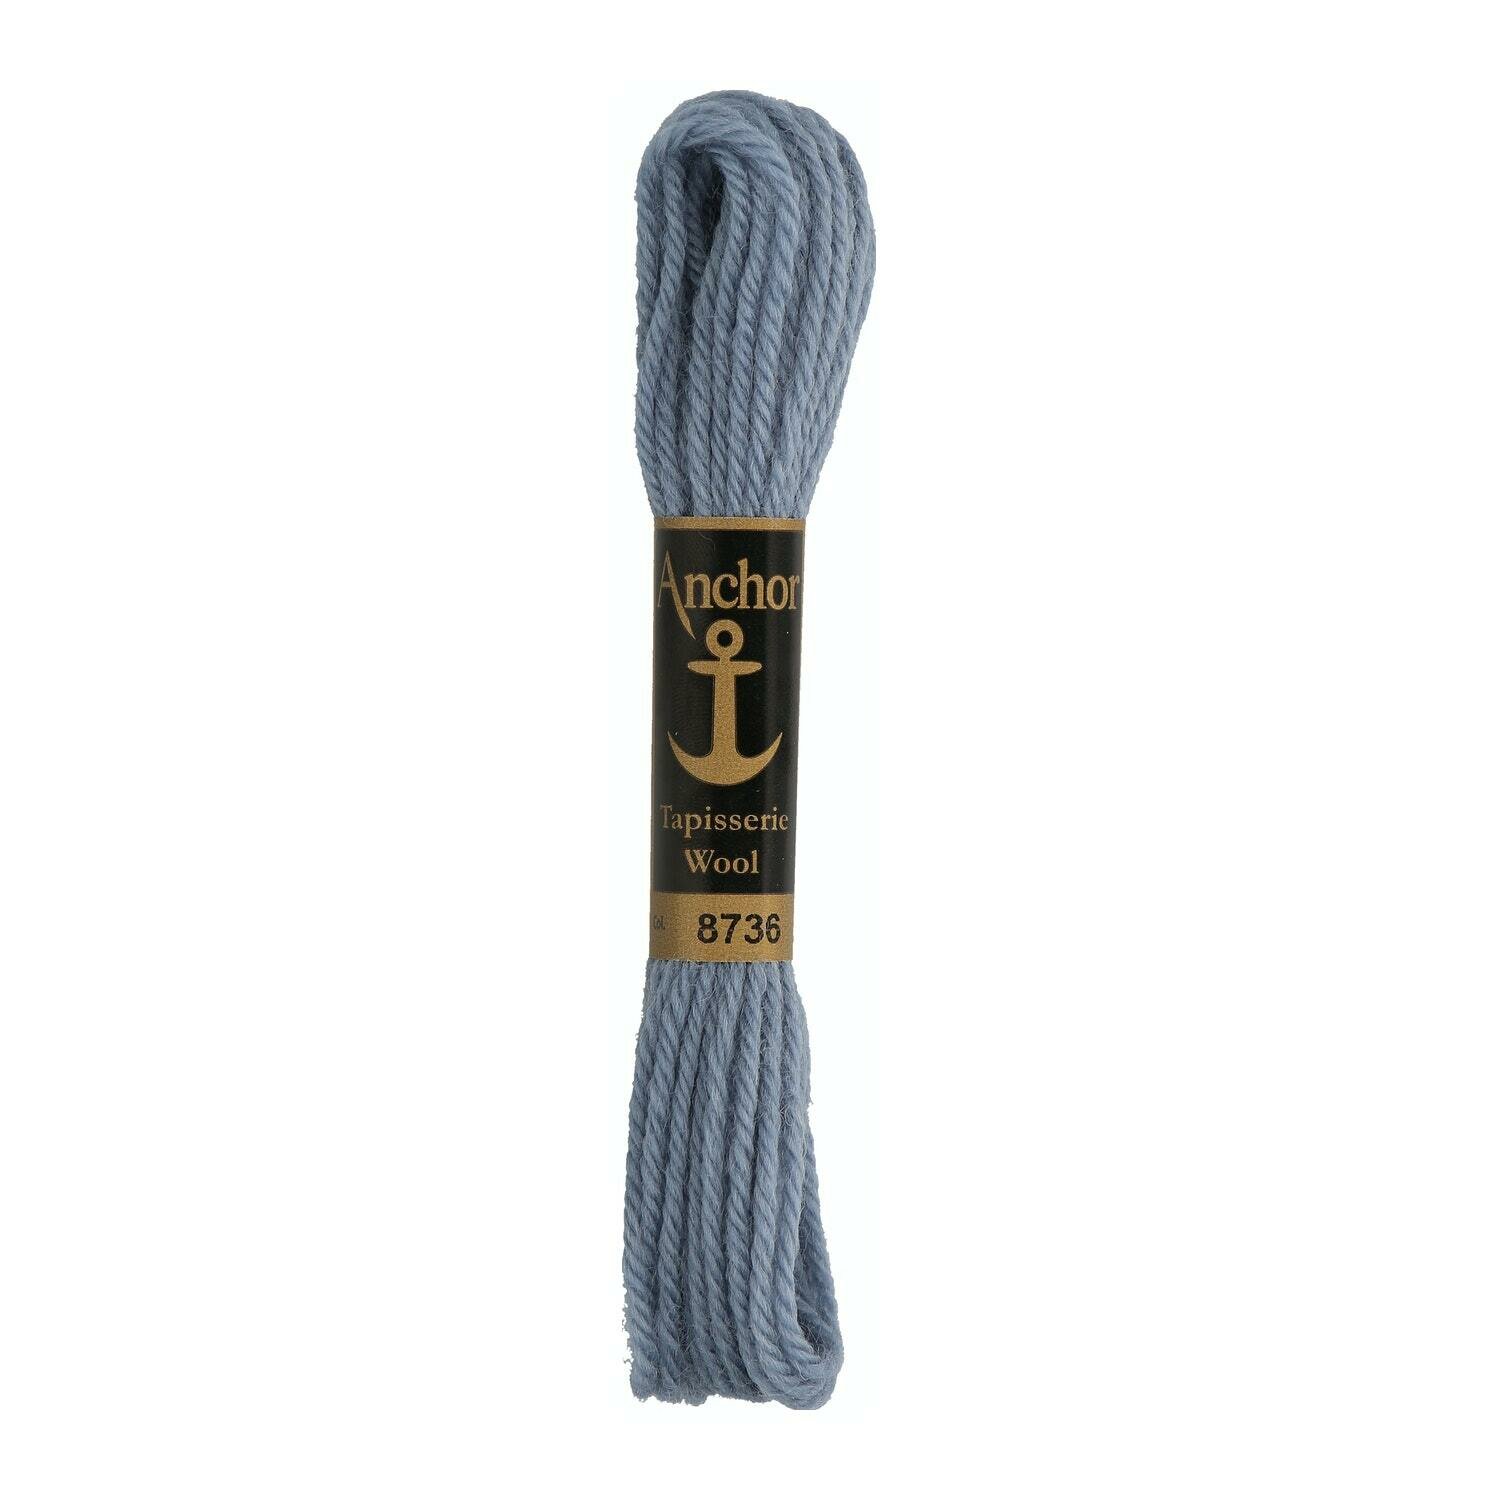 Anchor Tapisserie Wool # 08736